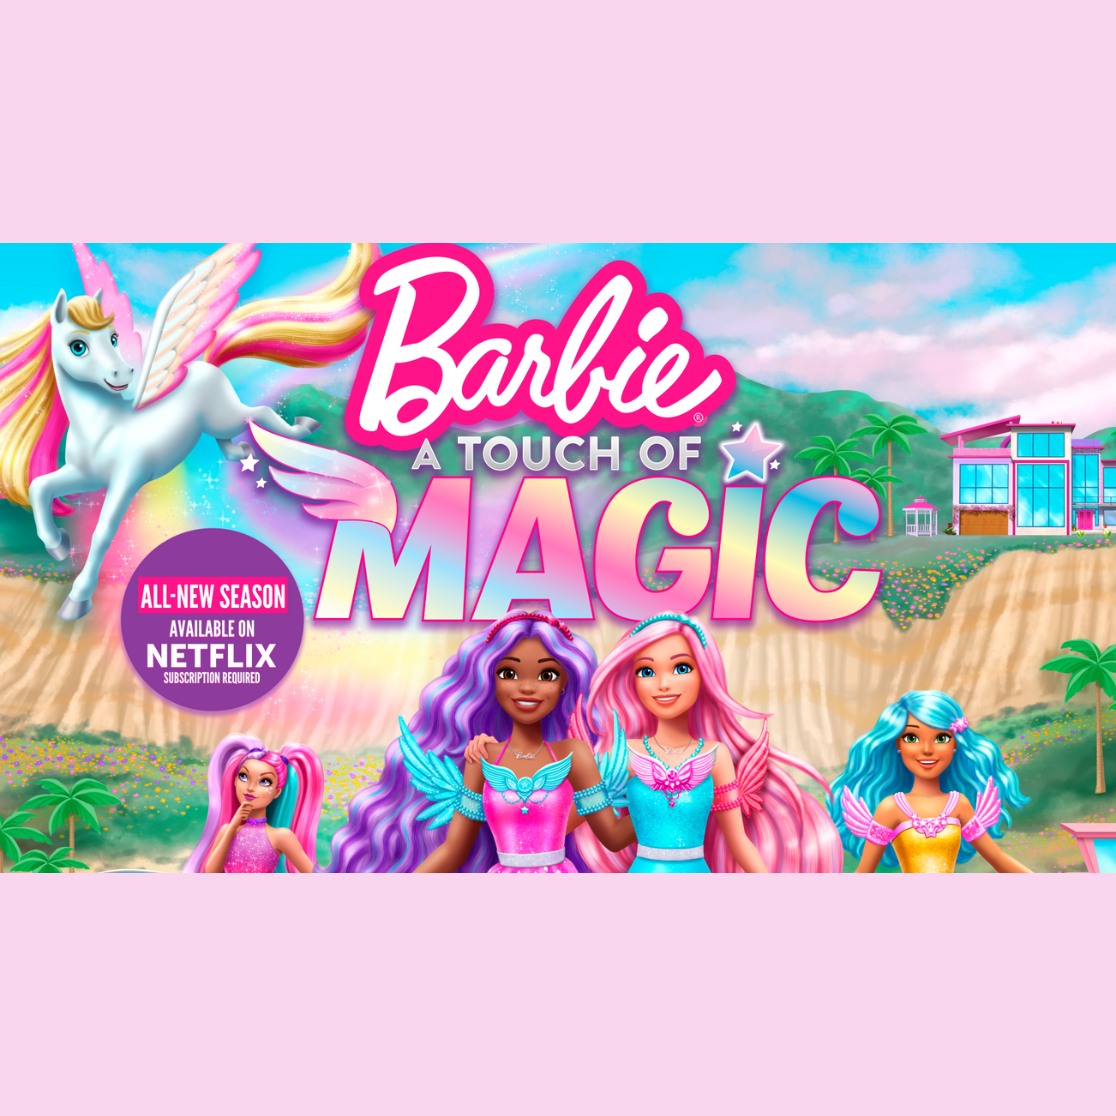 Barbie: A Touch of Magic Launching a Second Season on Netflix